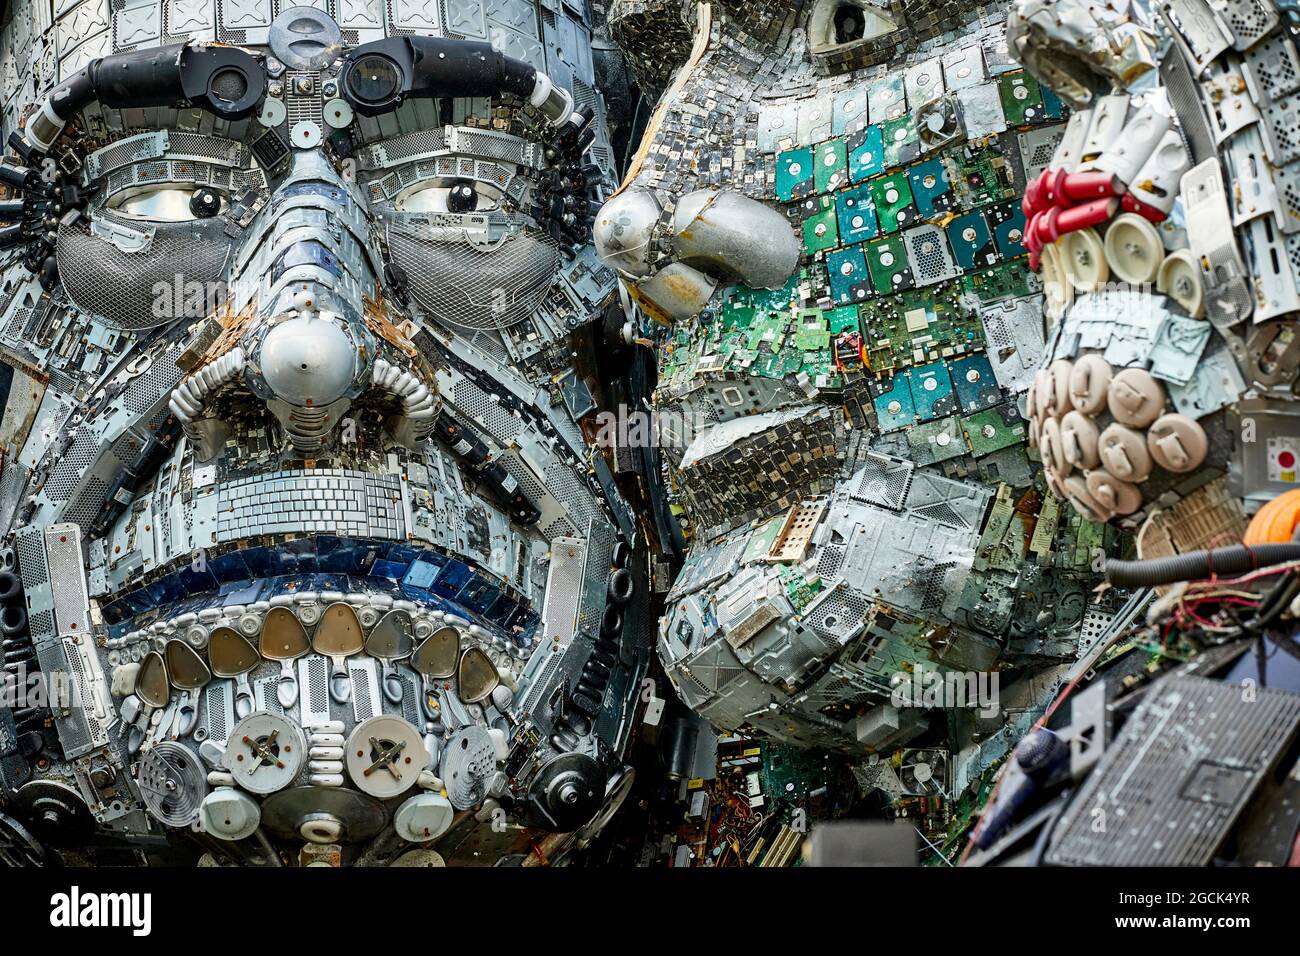 Stockport MusicMagpie giant Mount Rushmore style sculpture G7 leaders heads made entirely of discarded electronics  Mario Draghi Prime Minister Italy Stock Photo